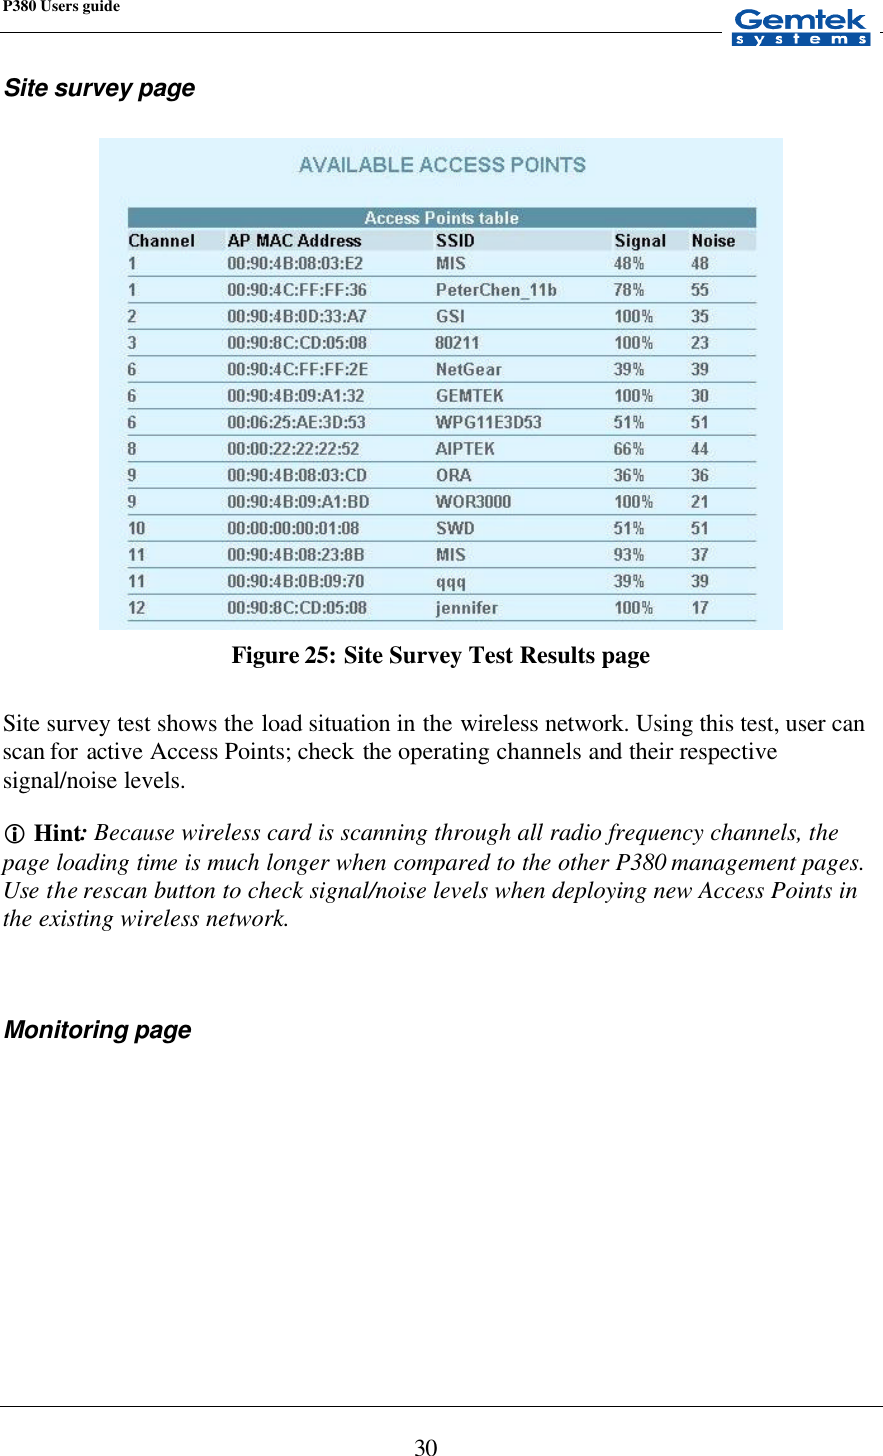 P380 Users guide            30 Site survey page   Figure 25: Site Survey Test Results page  Site survey test shows the load situation in the wireless network. Using this test, user can scan for  active Access Points; check the operating channels and their respective signal/noise levels.   i Hint: Because wireless card is scanning through all radio frequency channels, the page loading time is much longer when compared to the other P380 management pages. Use the rescan button to check signal/noise levels when deploying new Access Points in the existing wireless network.   Monitoring page  